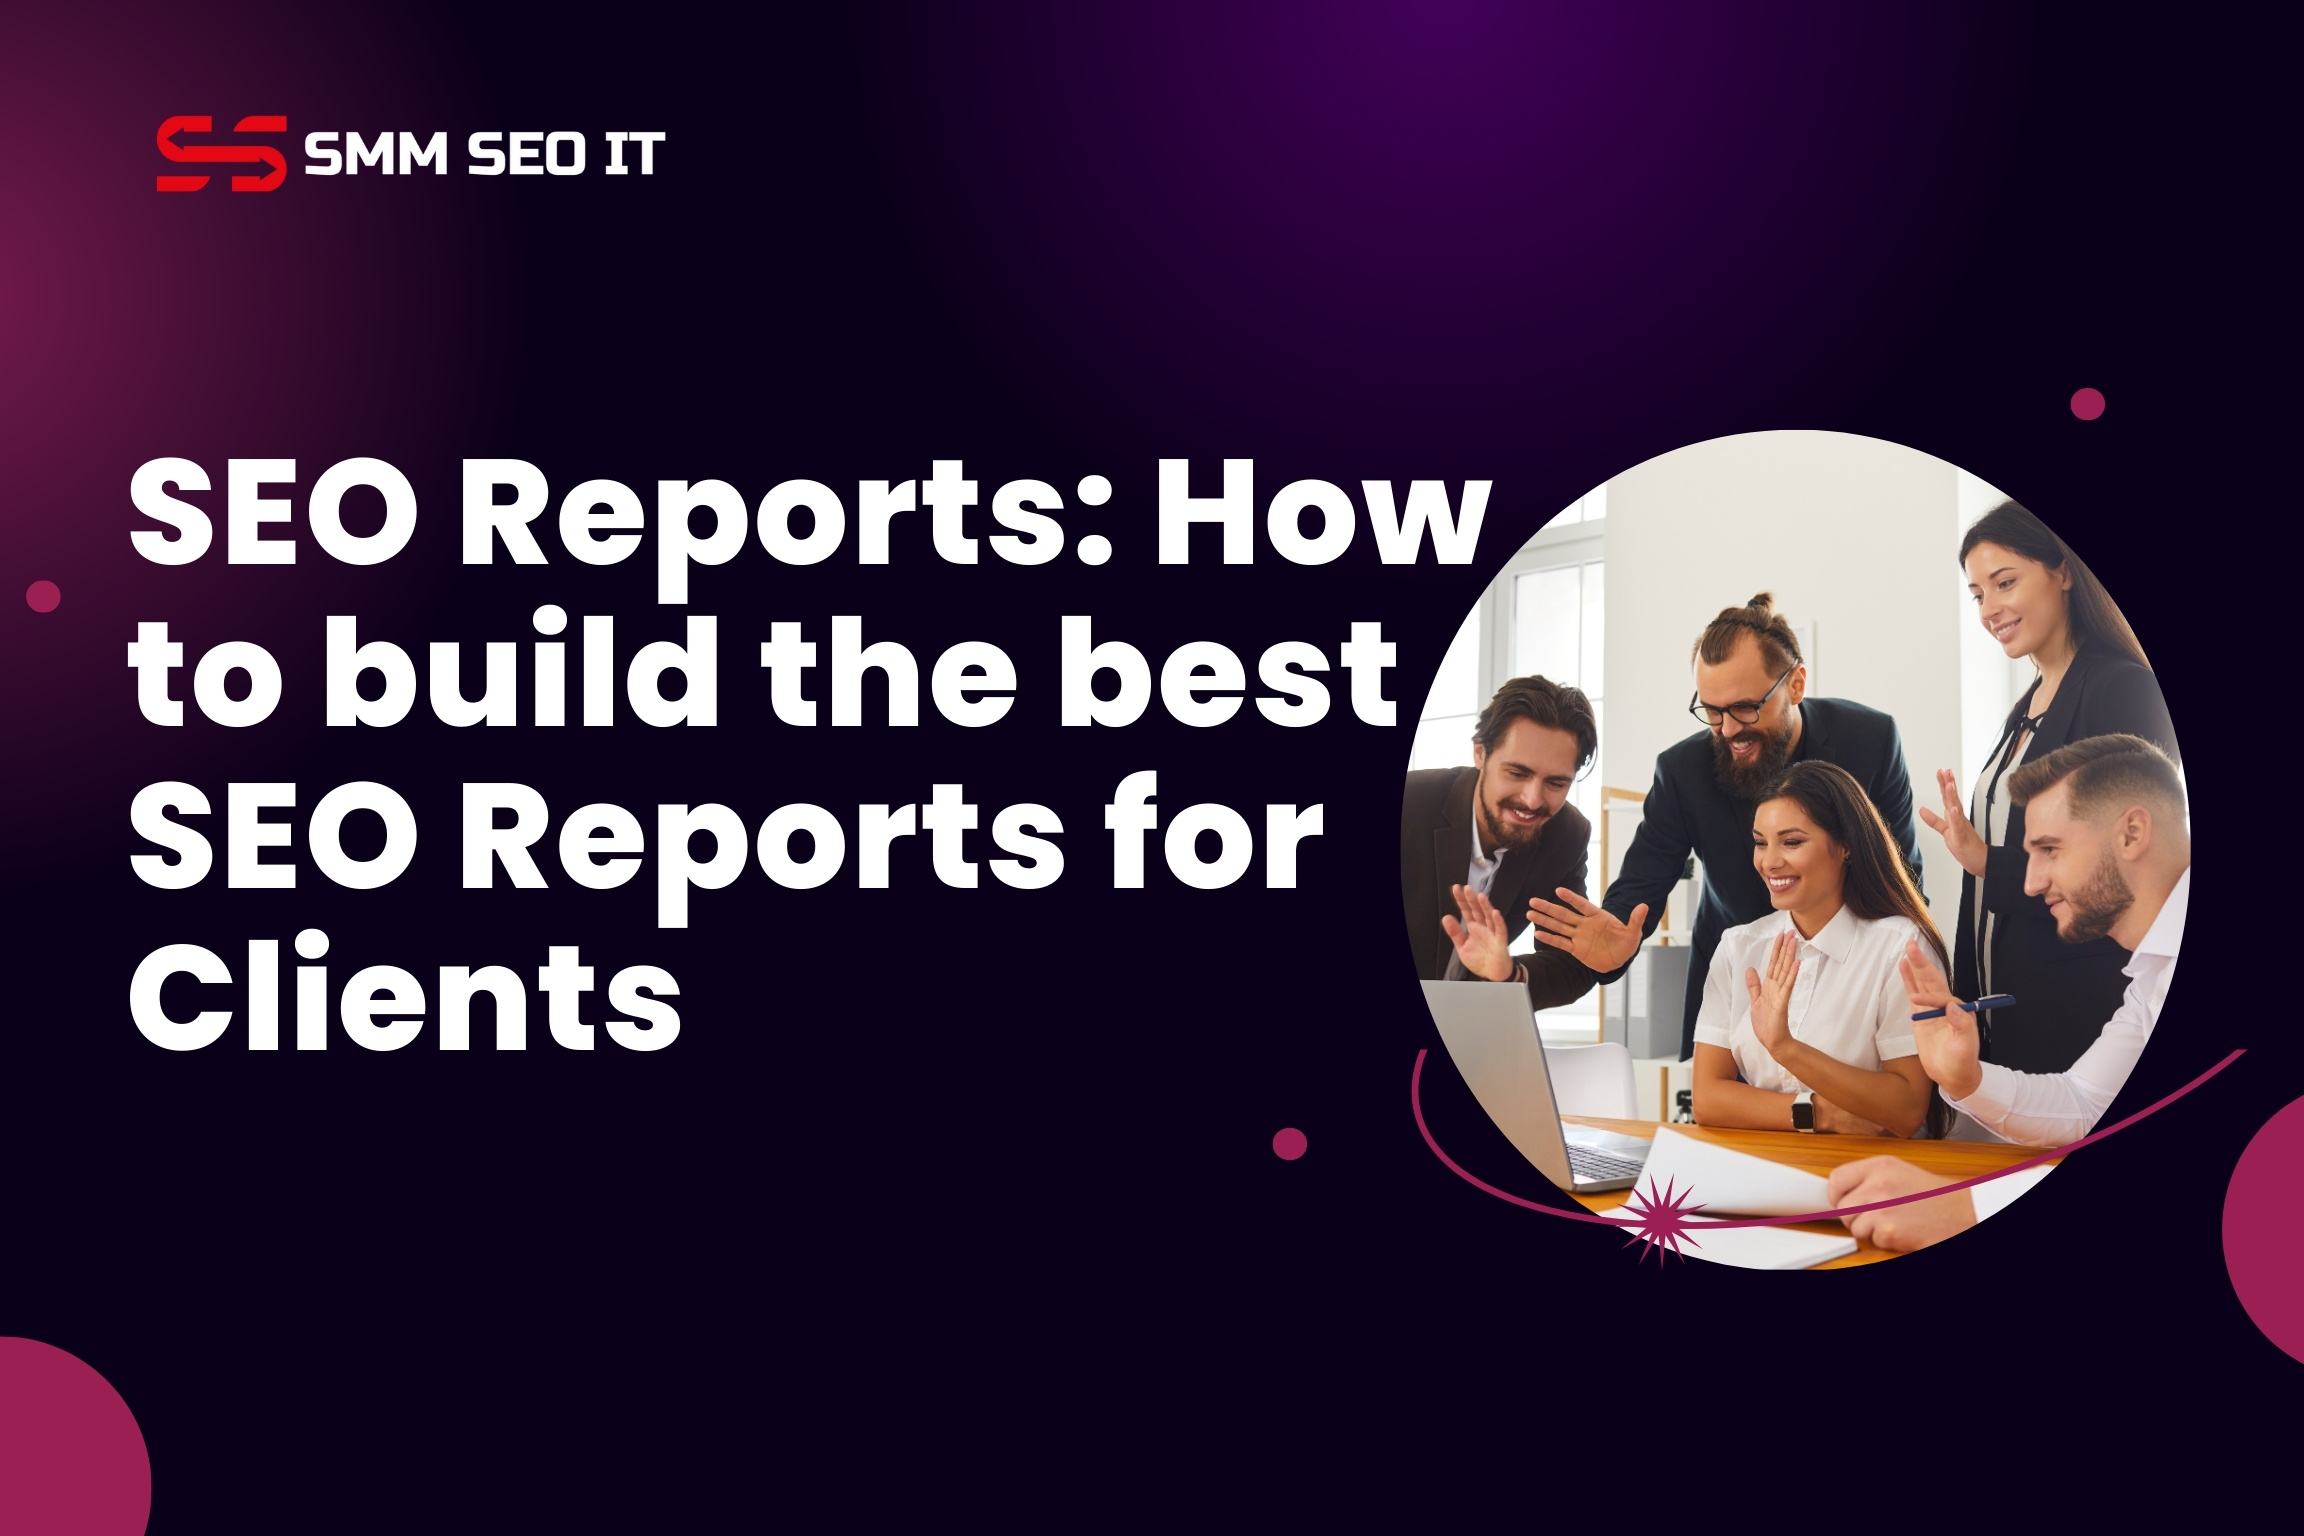 How to build the best SEO Reports for Clients